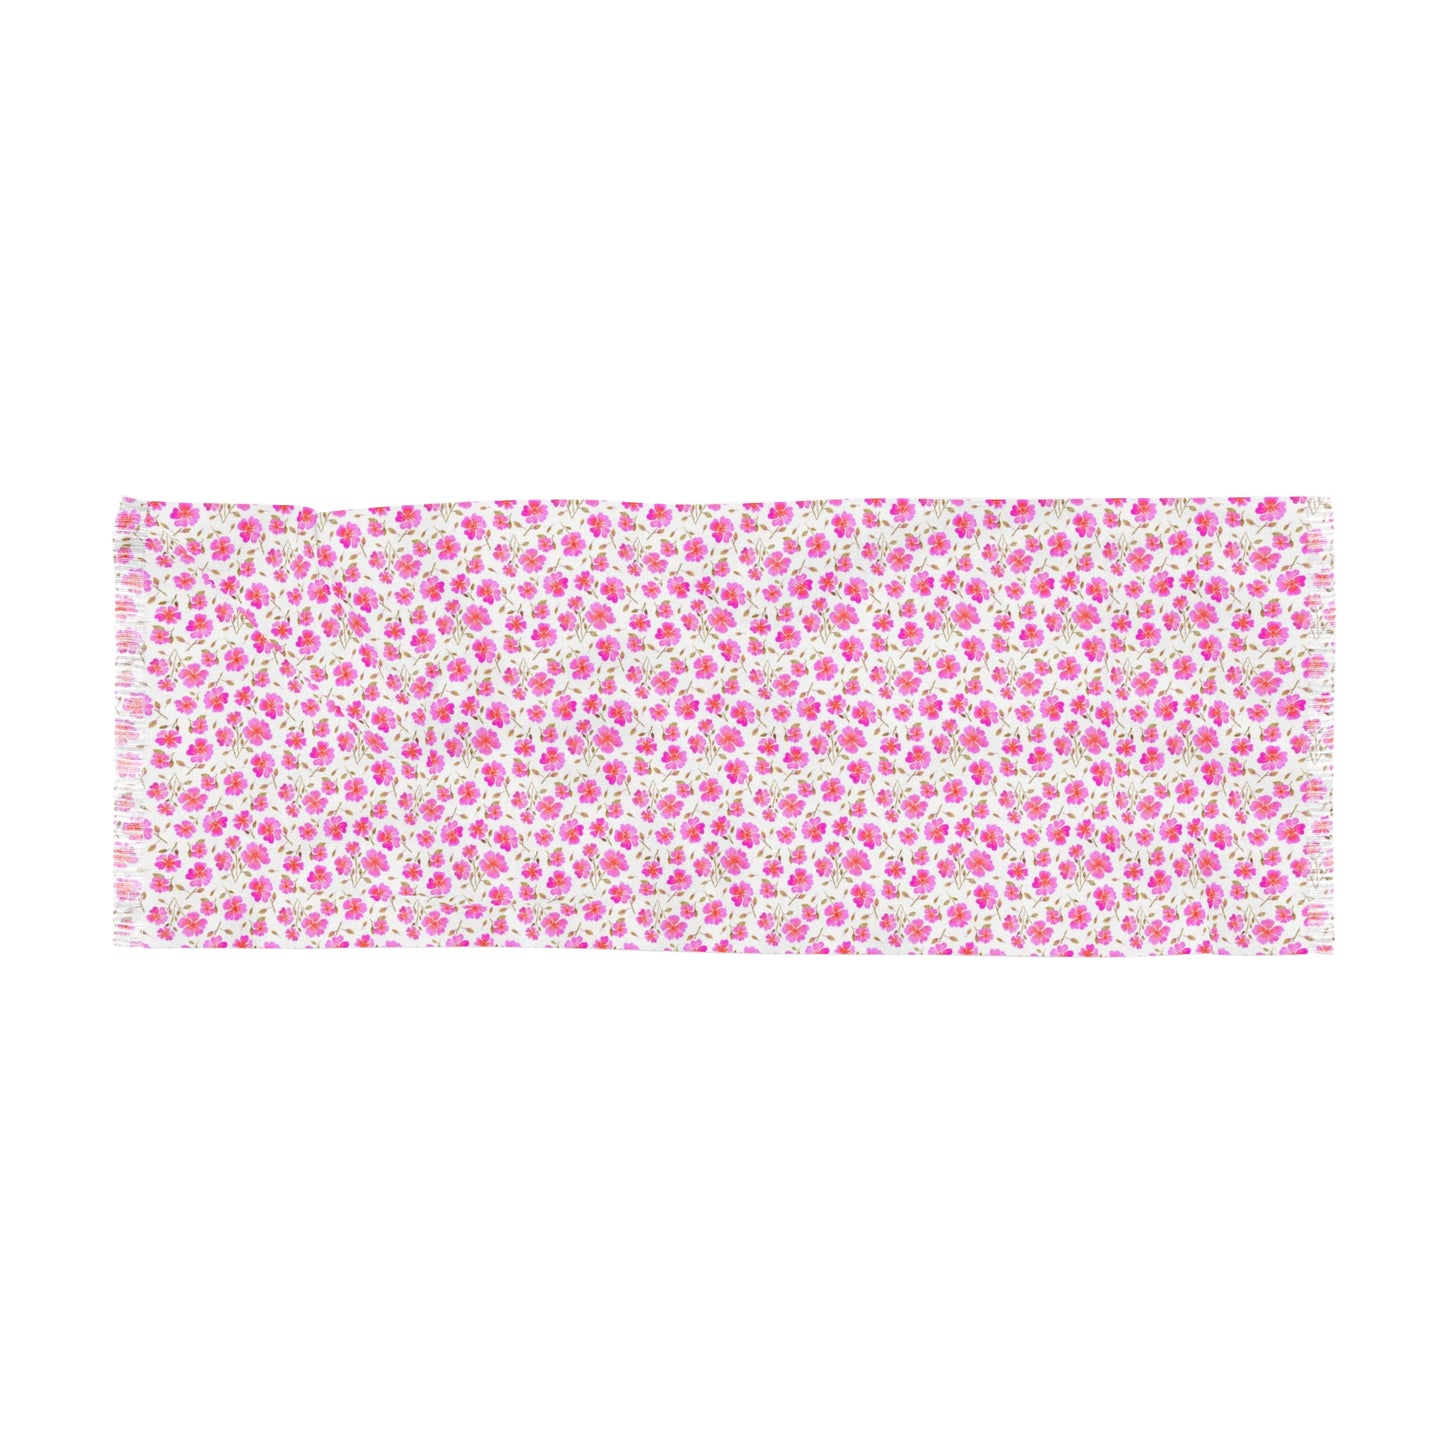 Hot Pink Wild Roses Light Scarf